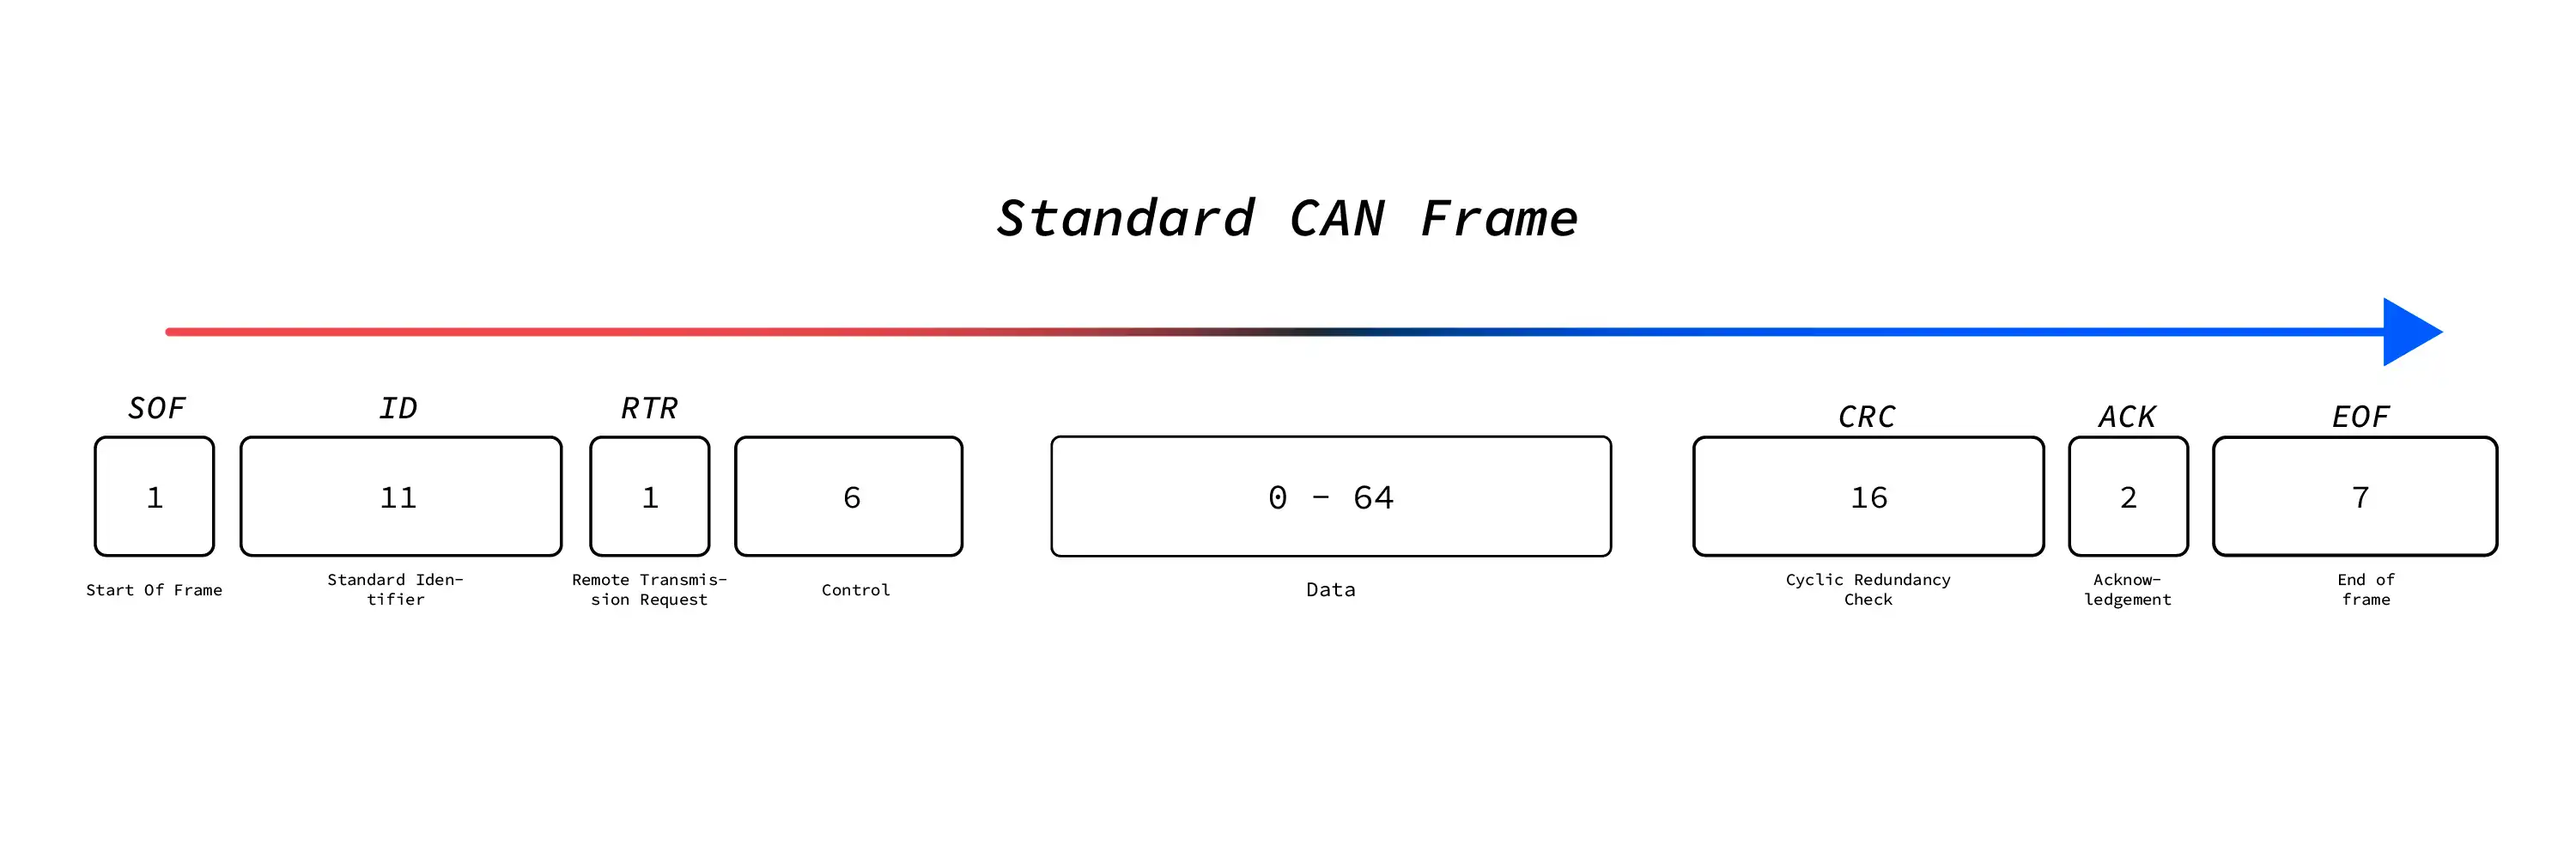 Typical standard CAN frame explained